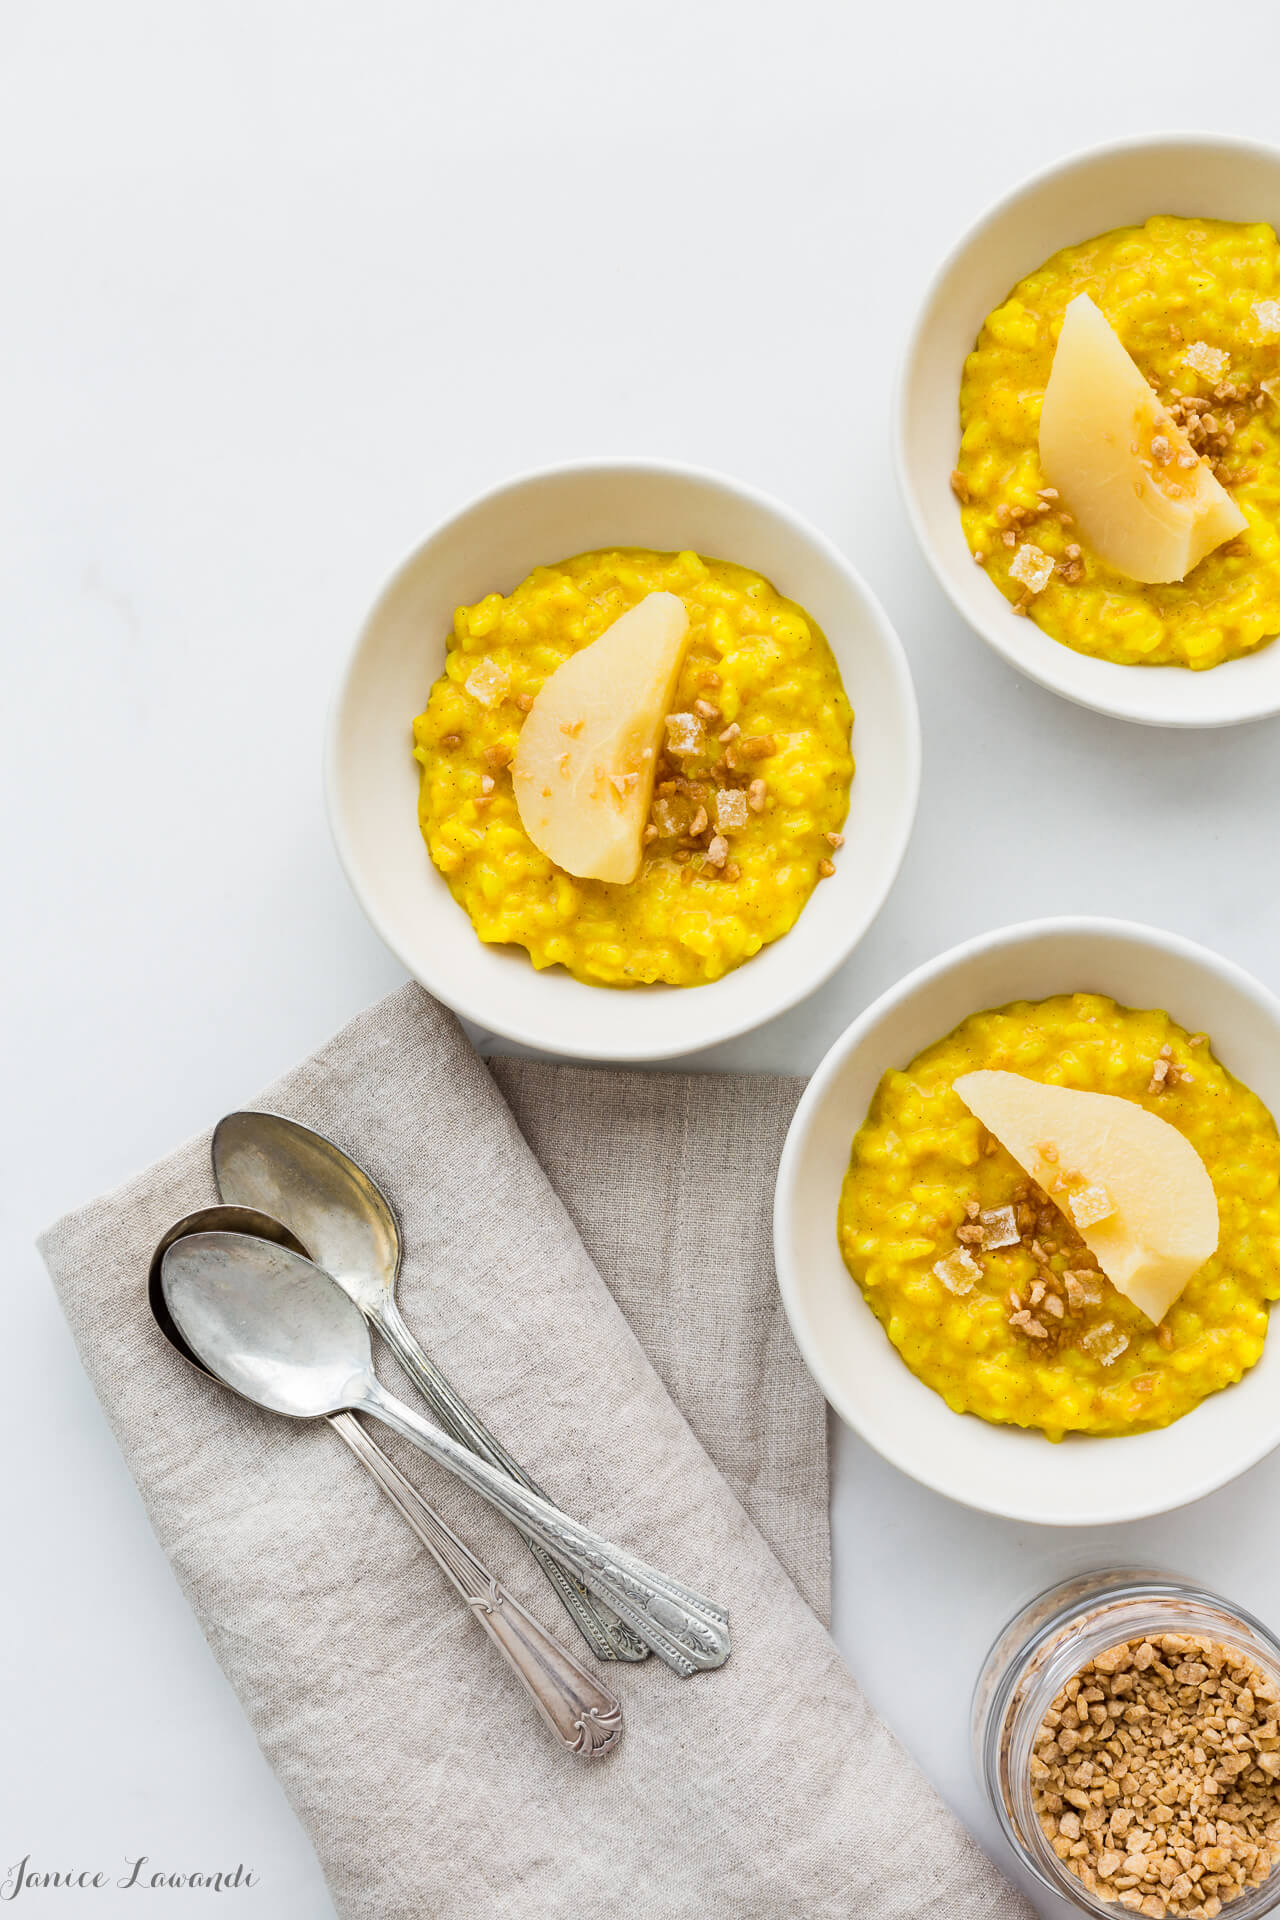 Golden milk rice pudding spiced with turmeric, ginger, cardamom, and cinnamon served with poached pears